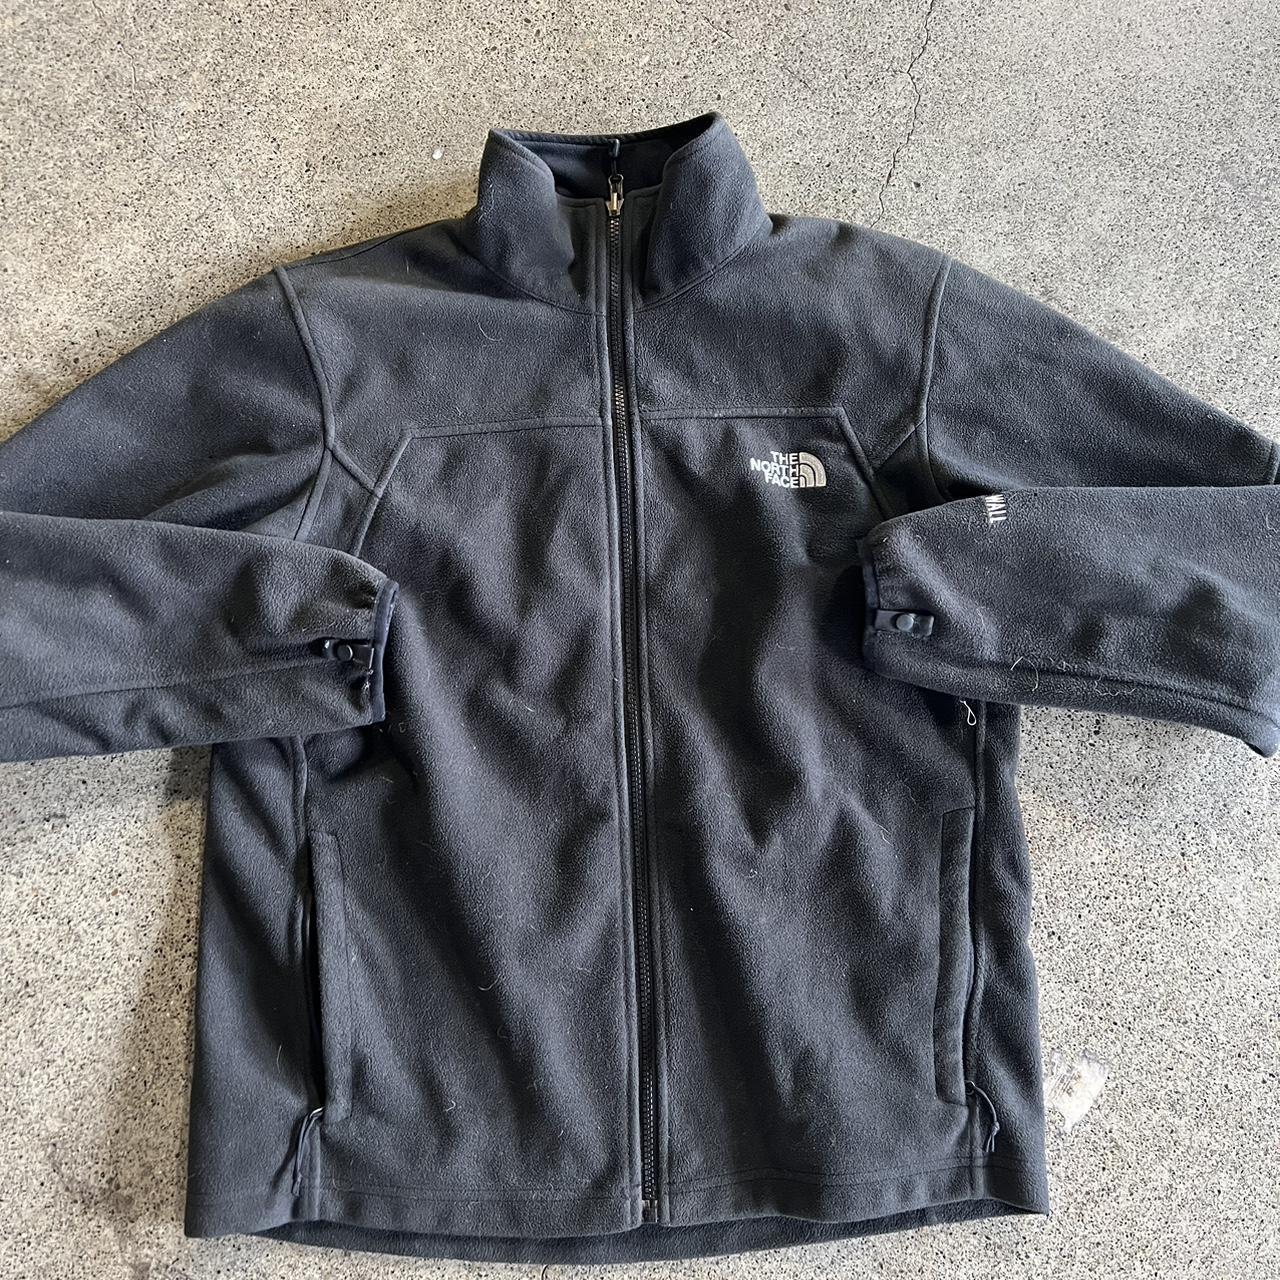 The North Face Men's Black and White Jacket